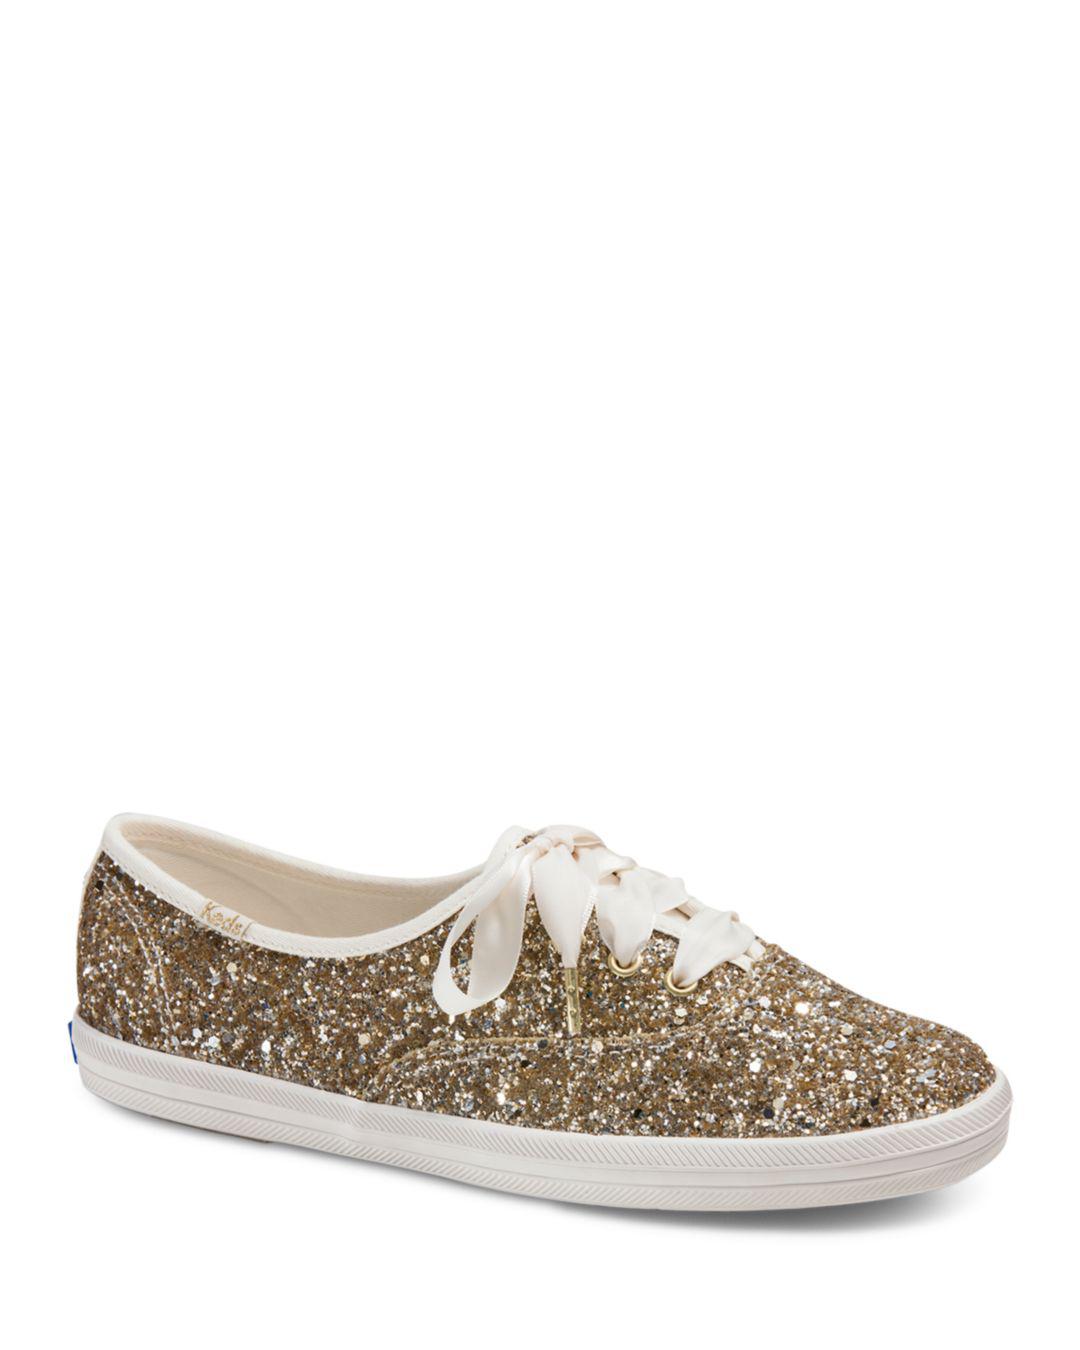 Keds Canvas X Kate Spade New York Women's Glitter Lace Up Sneakers - Lyst